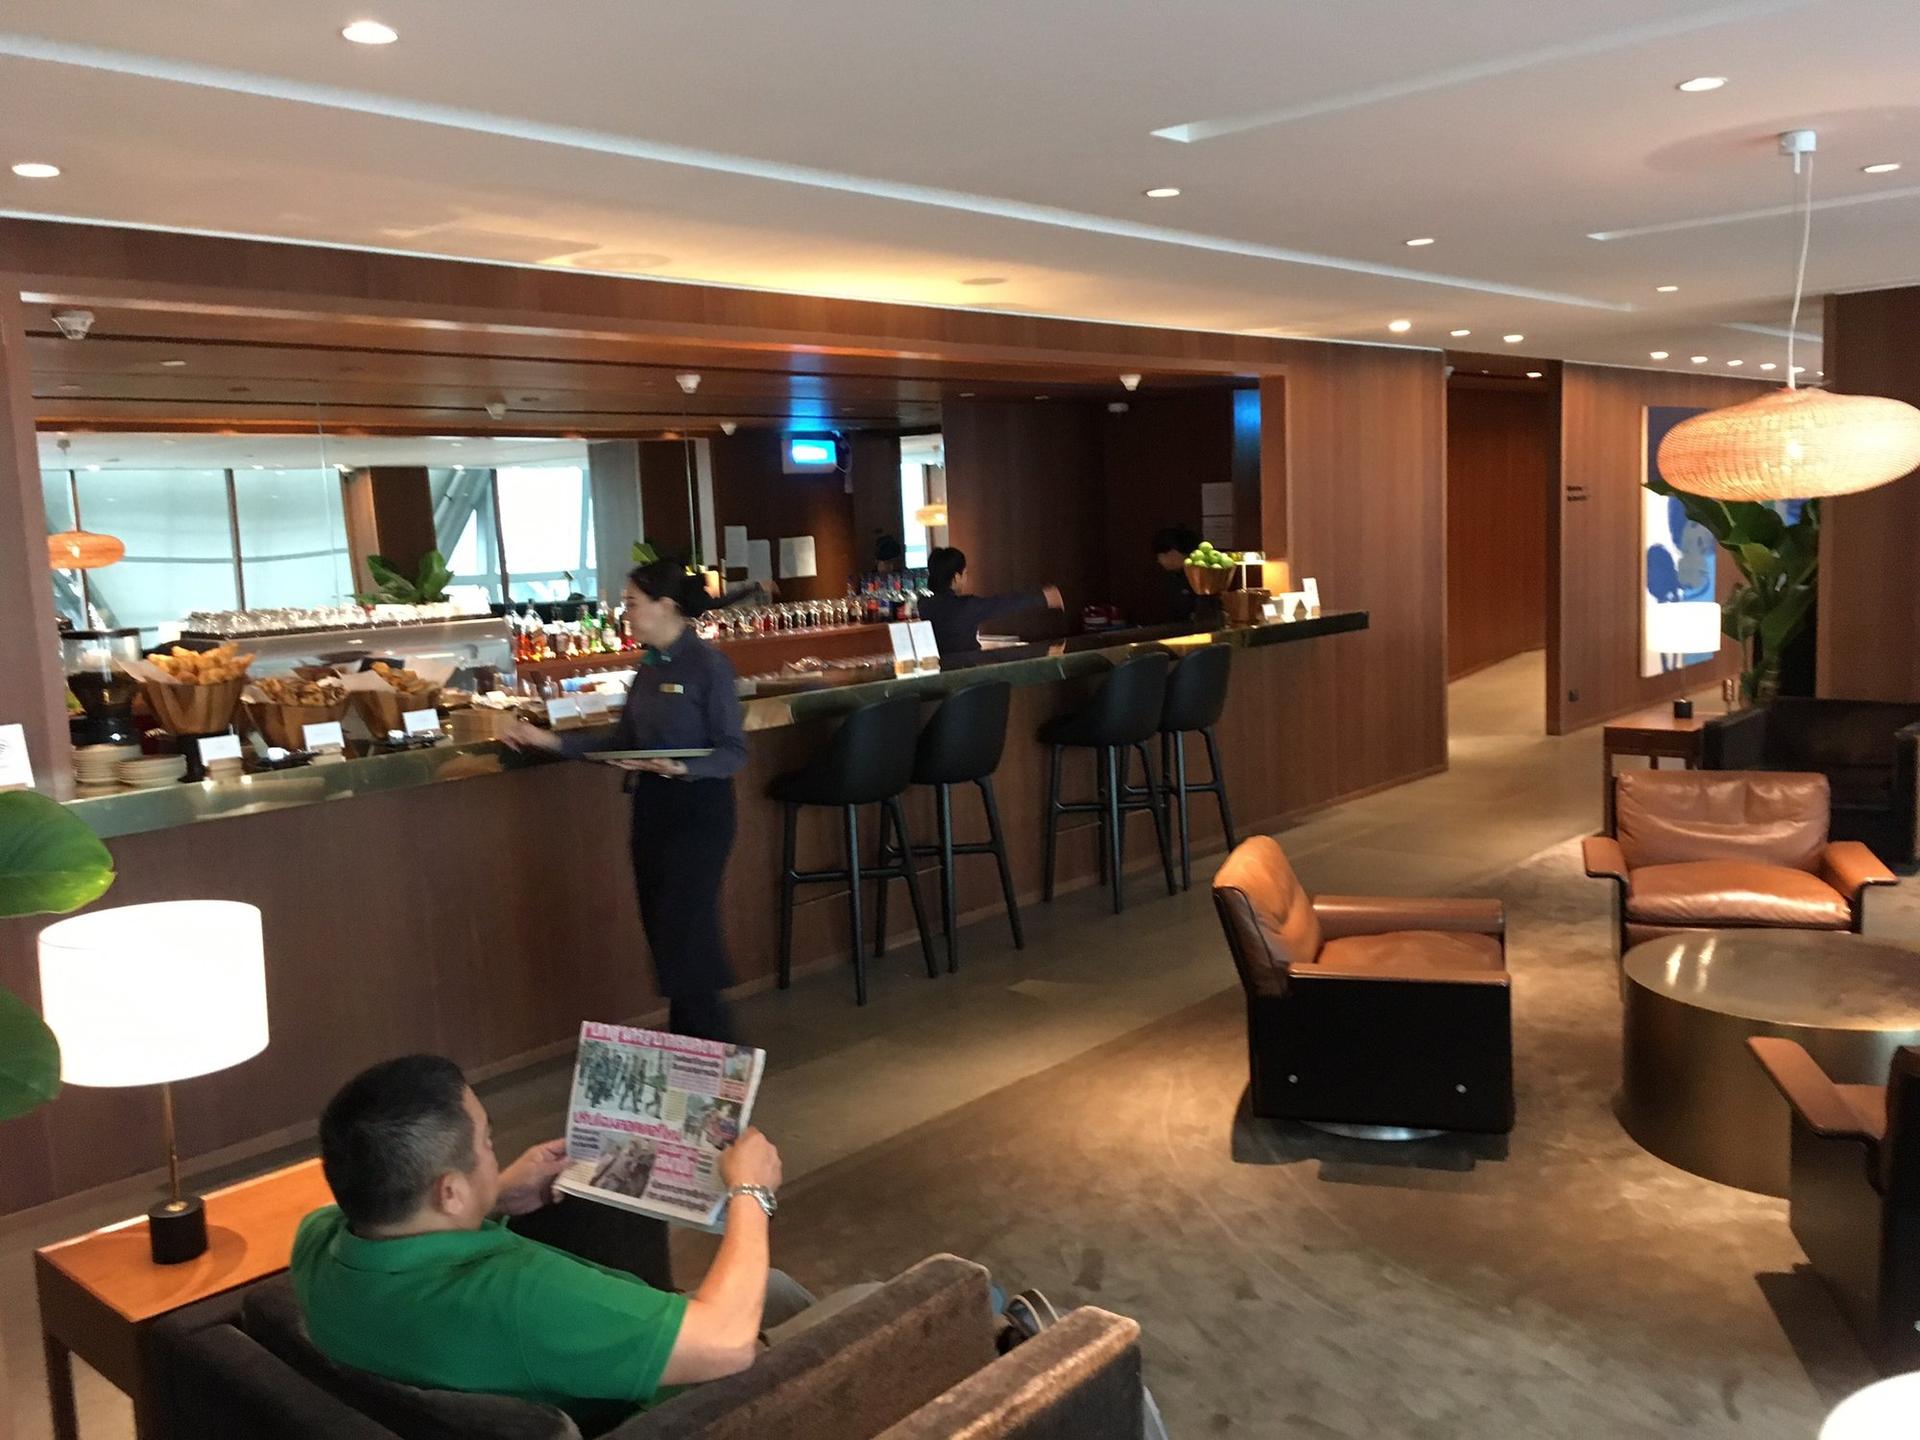 Cathay Pacific First and Business Class Lounge image 67 of 69